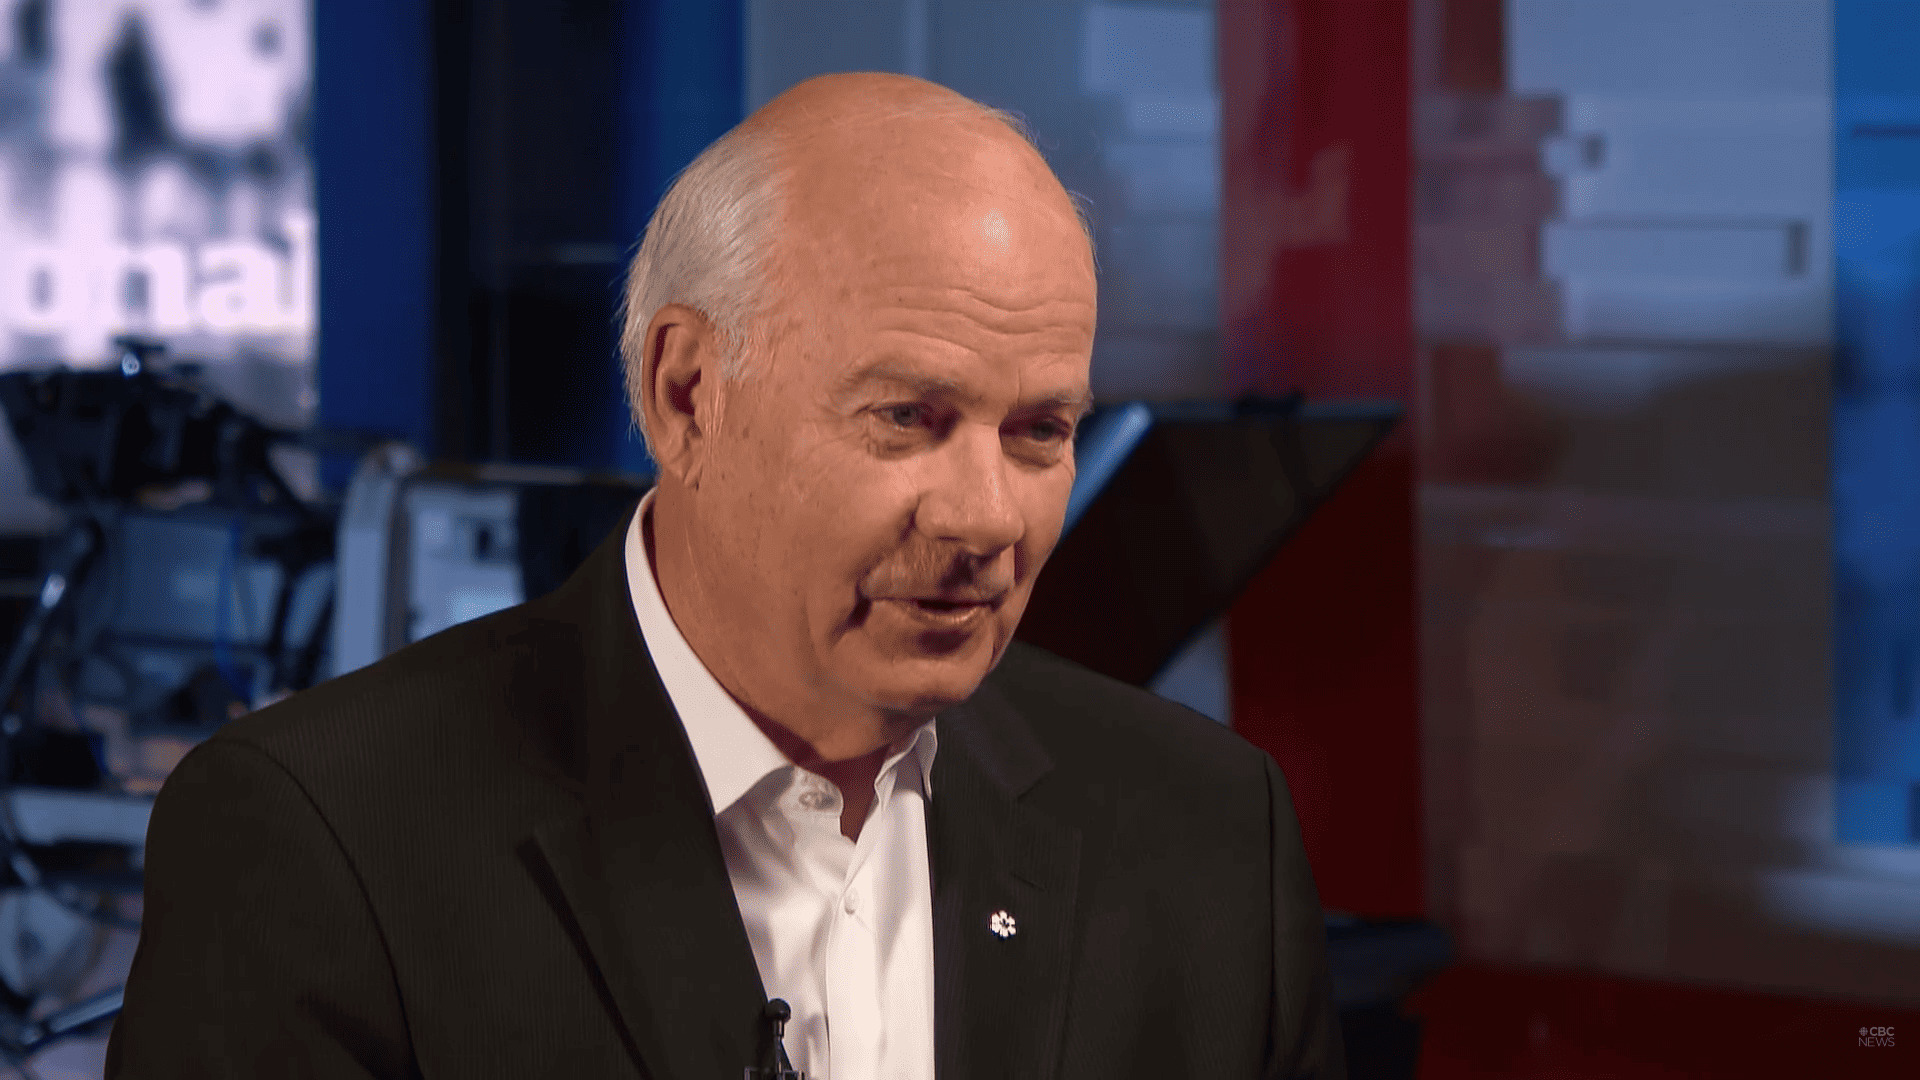 Peter Mansbridge on Retiring, Rock Collections and Hardest Thing About Leaving CBC (23:06)